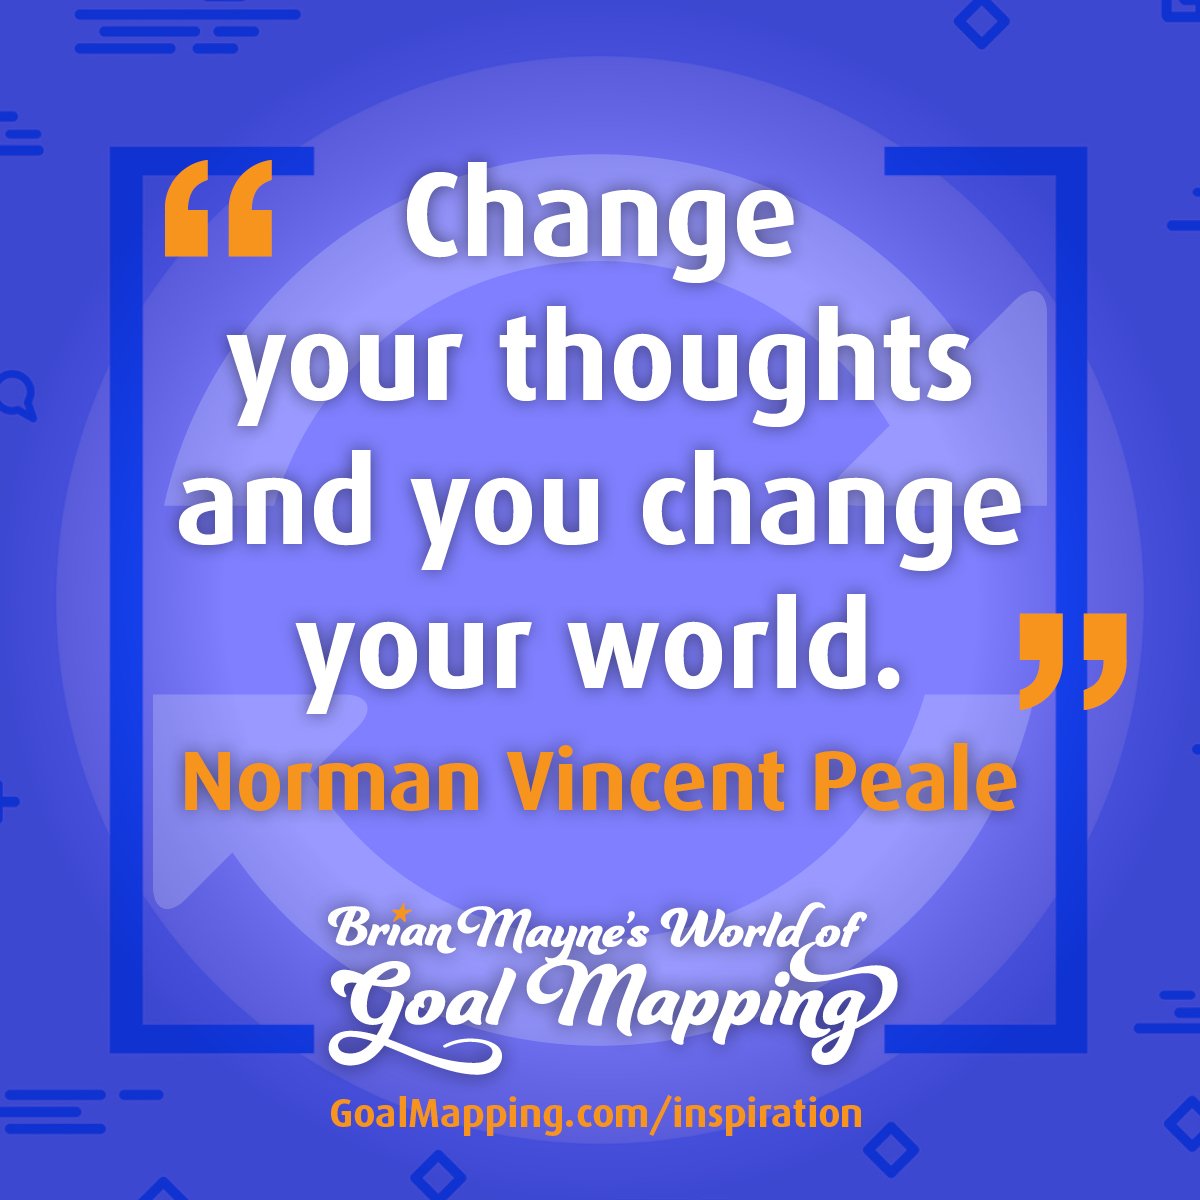 "Change your thoughts and you change your world." Norman Vincent Peale